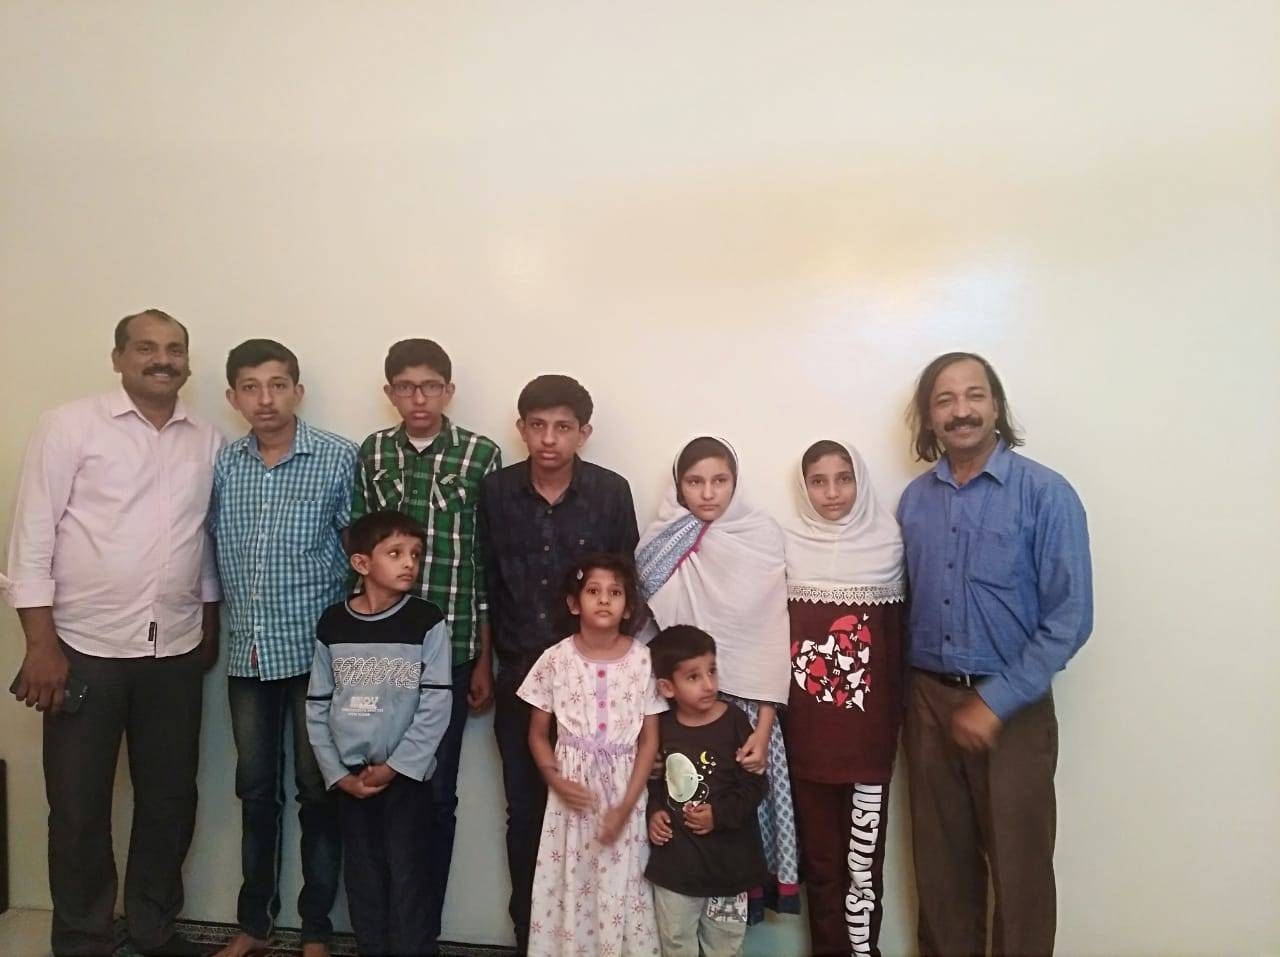 Social worker Shihab Kottukad, right, with the orphaned children before their departure to Canada.